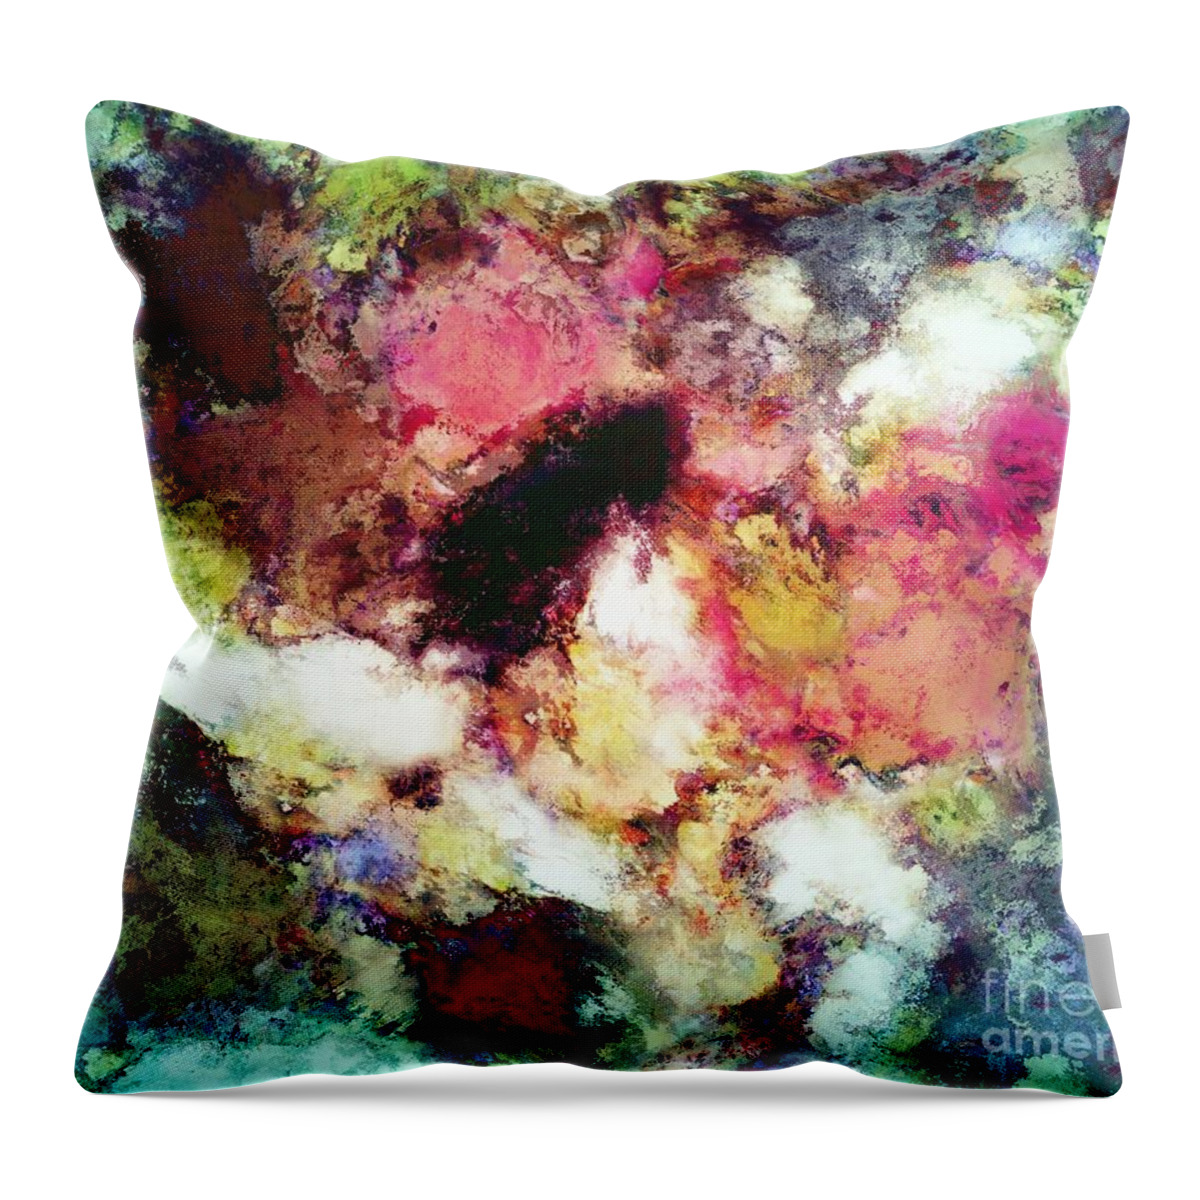 Complex Throw Pillow featuring the digital art Complicated garden by Keith Mills